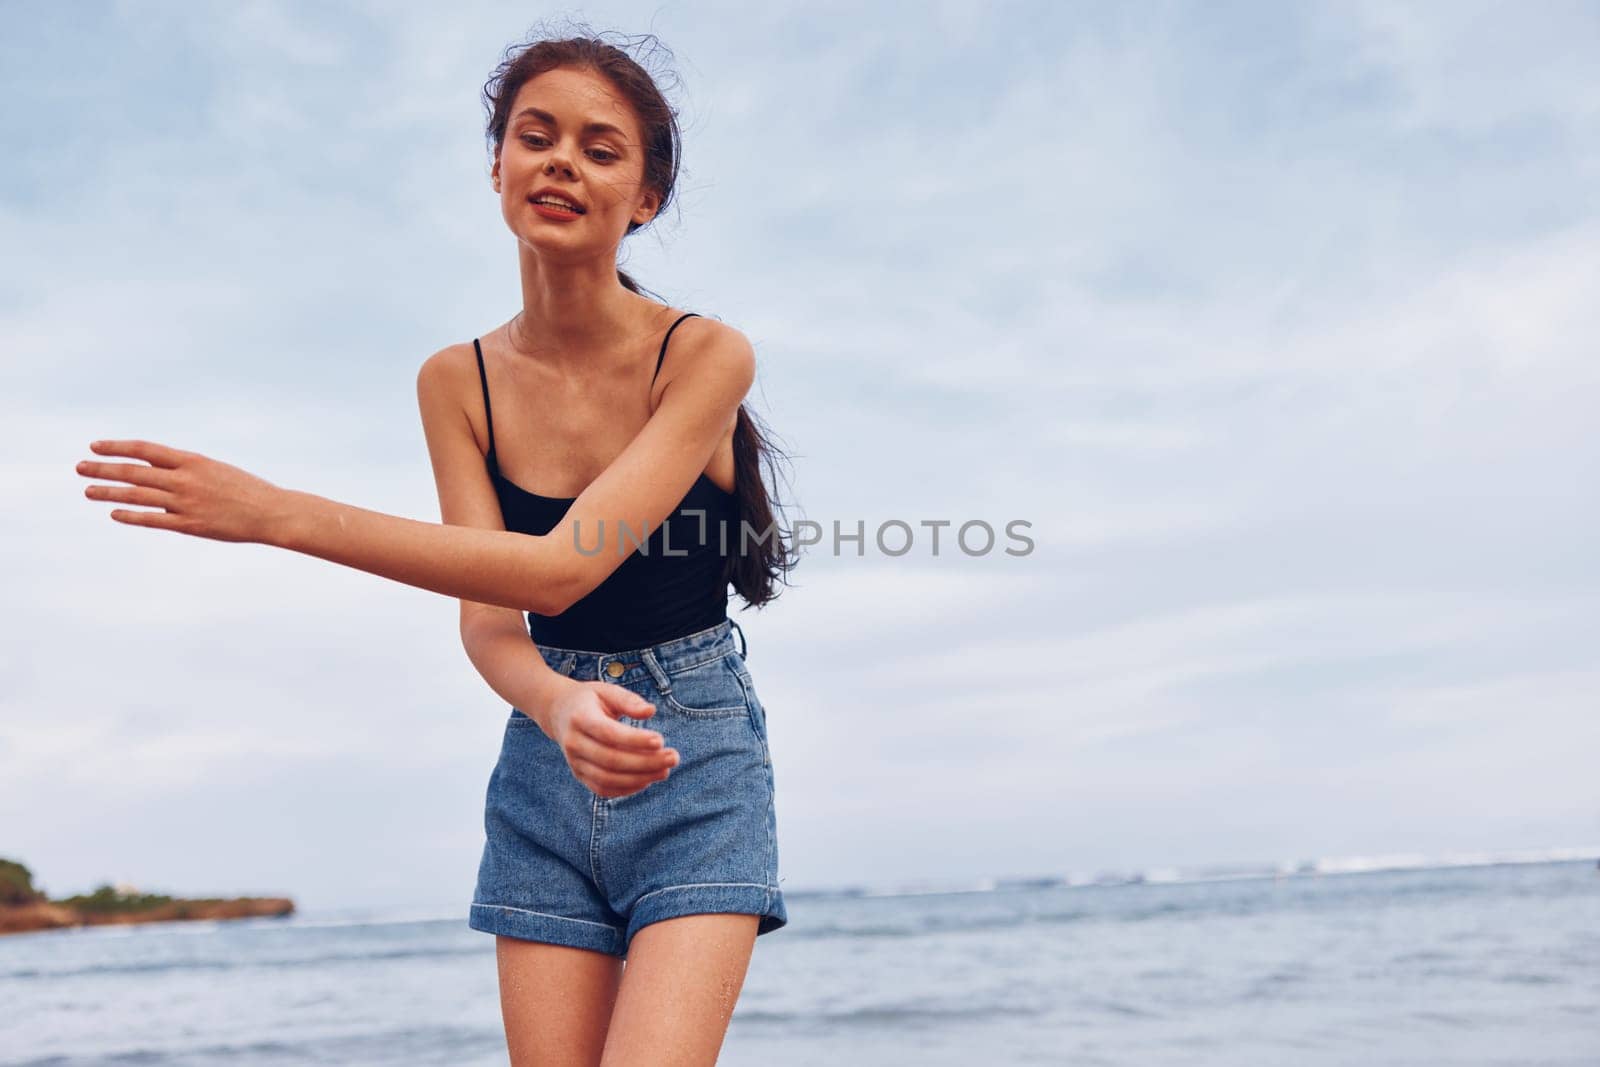 woman ocean sunset smile sea wave travel running tan shore happy summer nature smiling sexy young leisure walking person lifestyle beach